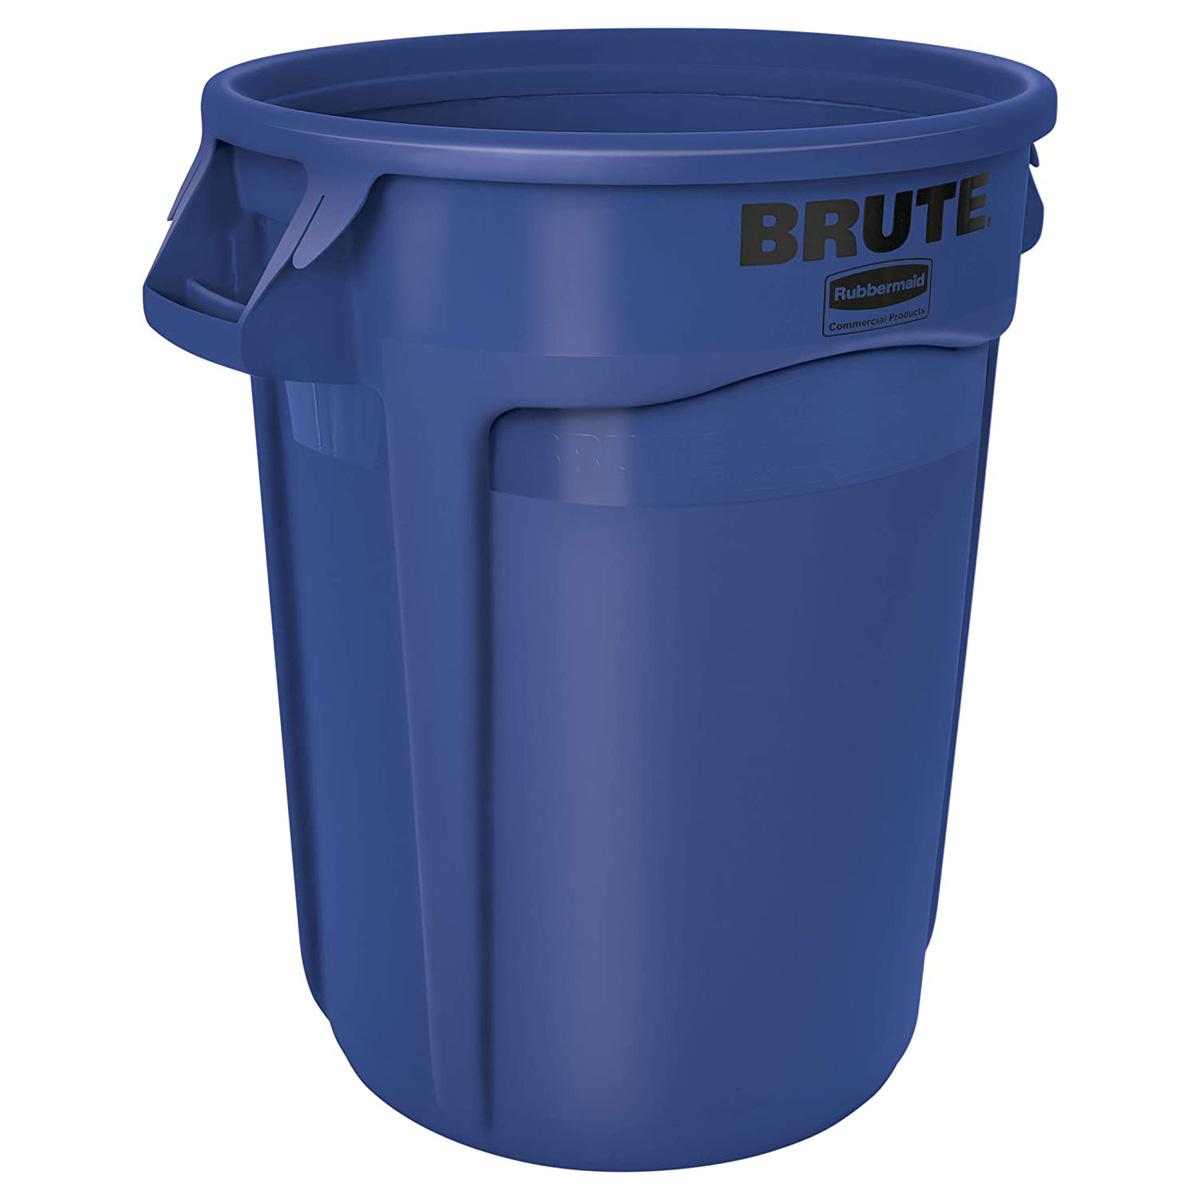 Rubbermaid Commercial Heavy-Duty Round Trash Can for $27.99 Shipped